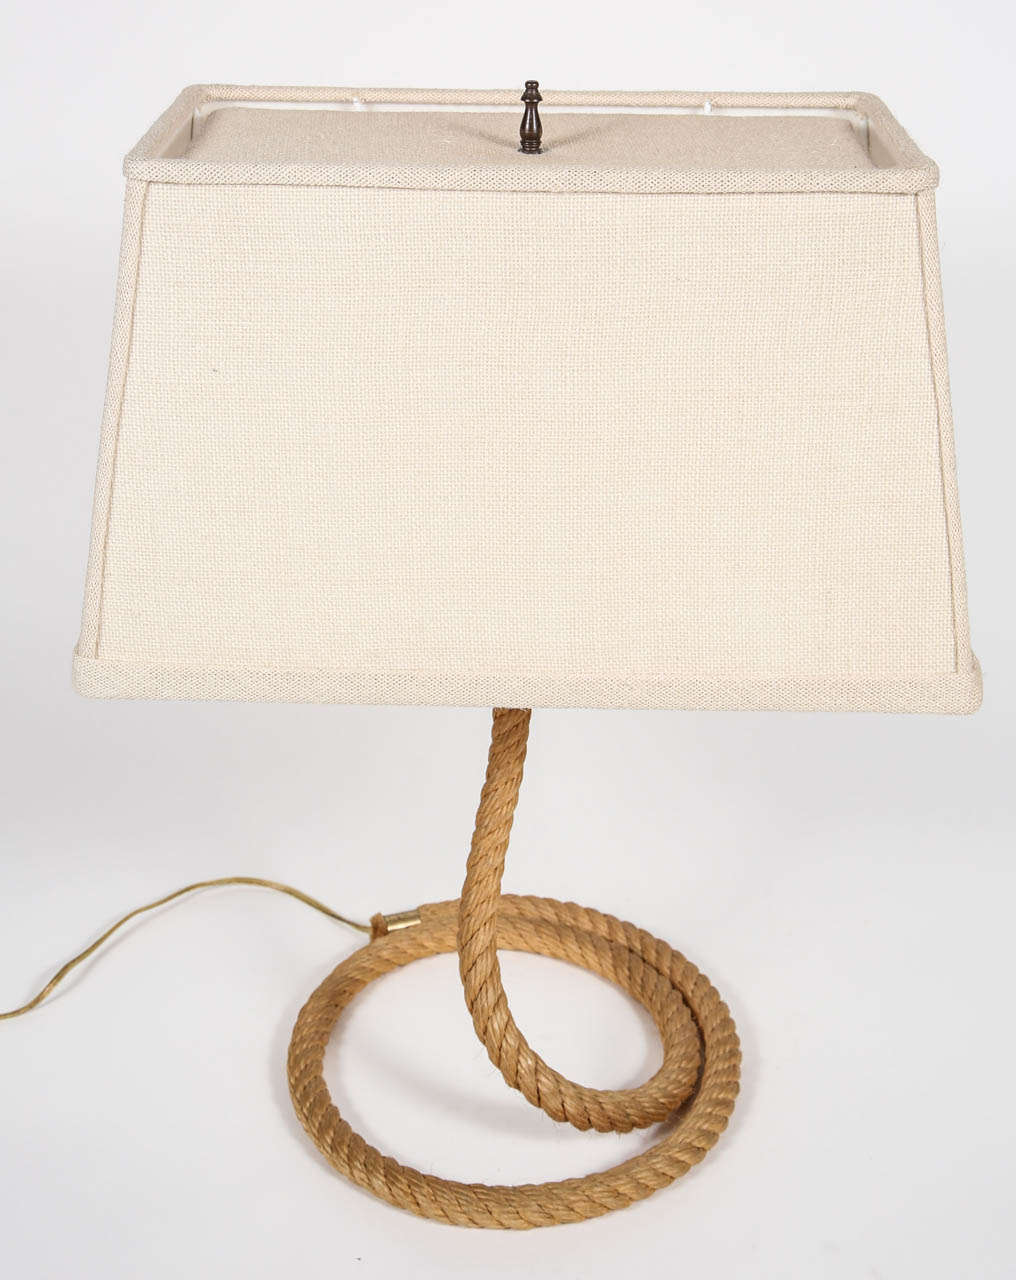 Coiled rope lamp with single bulb.  Shade sold separately.  Dimensions: 10 3/4